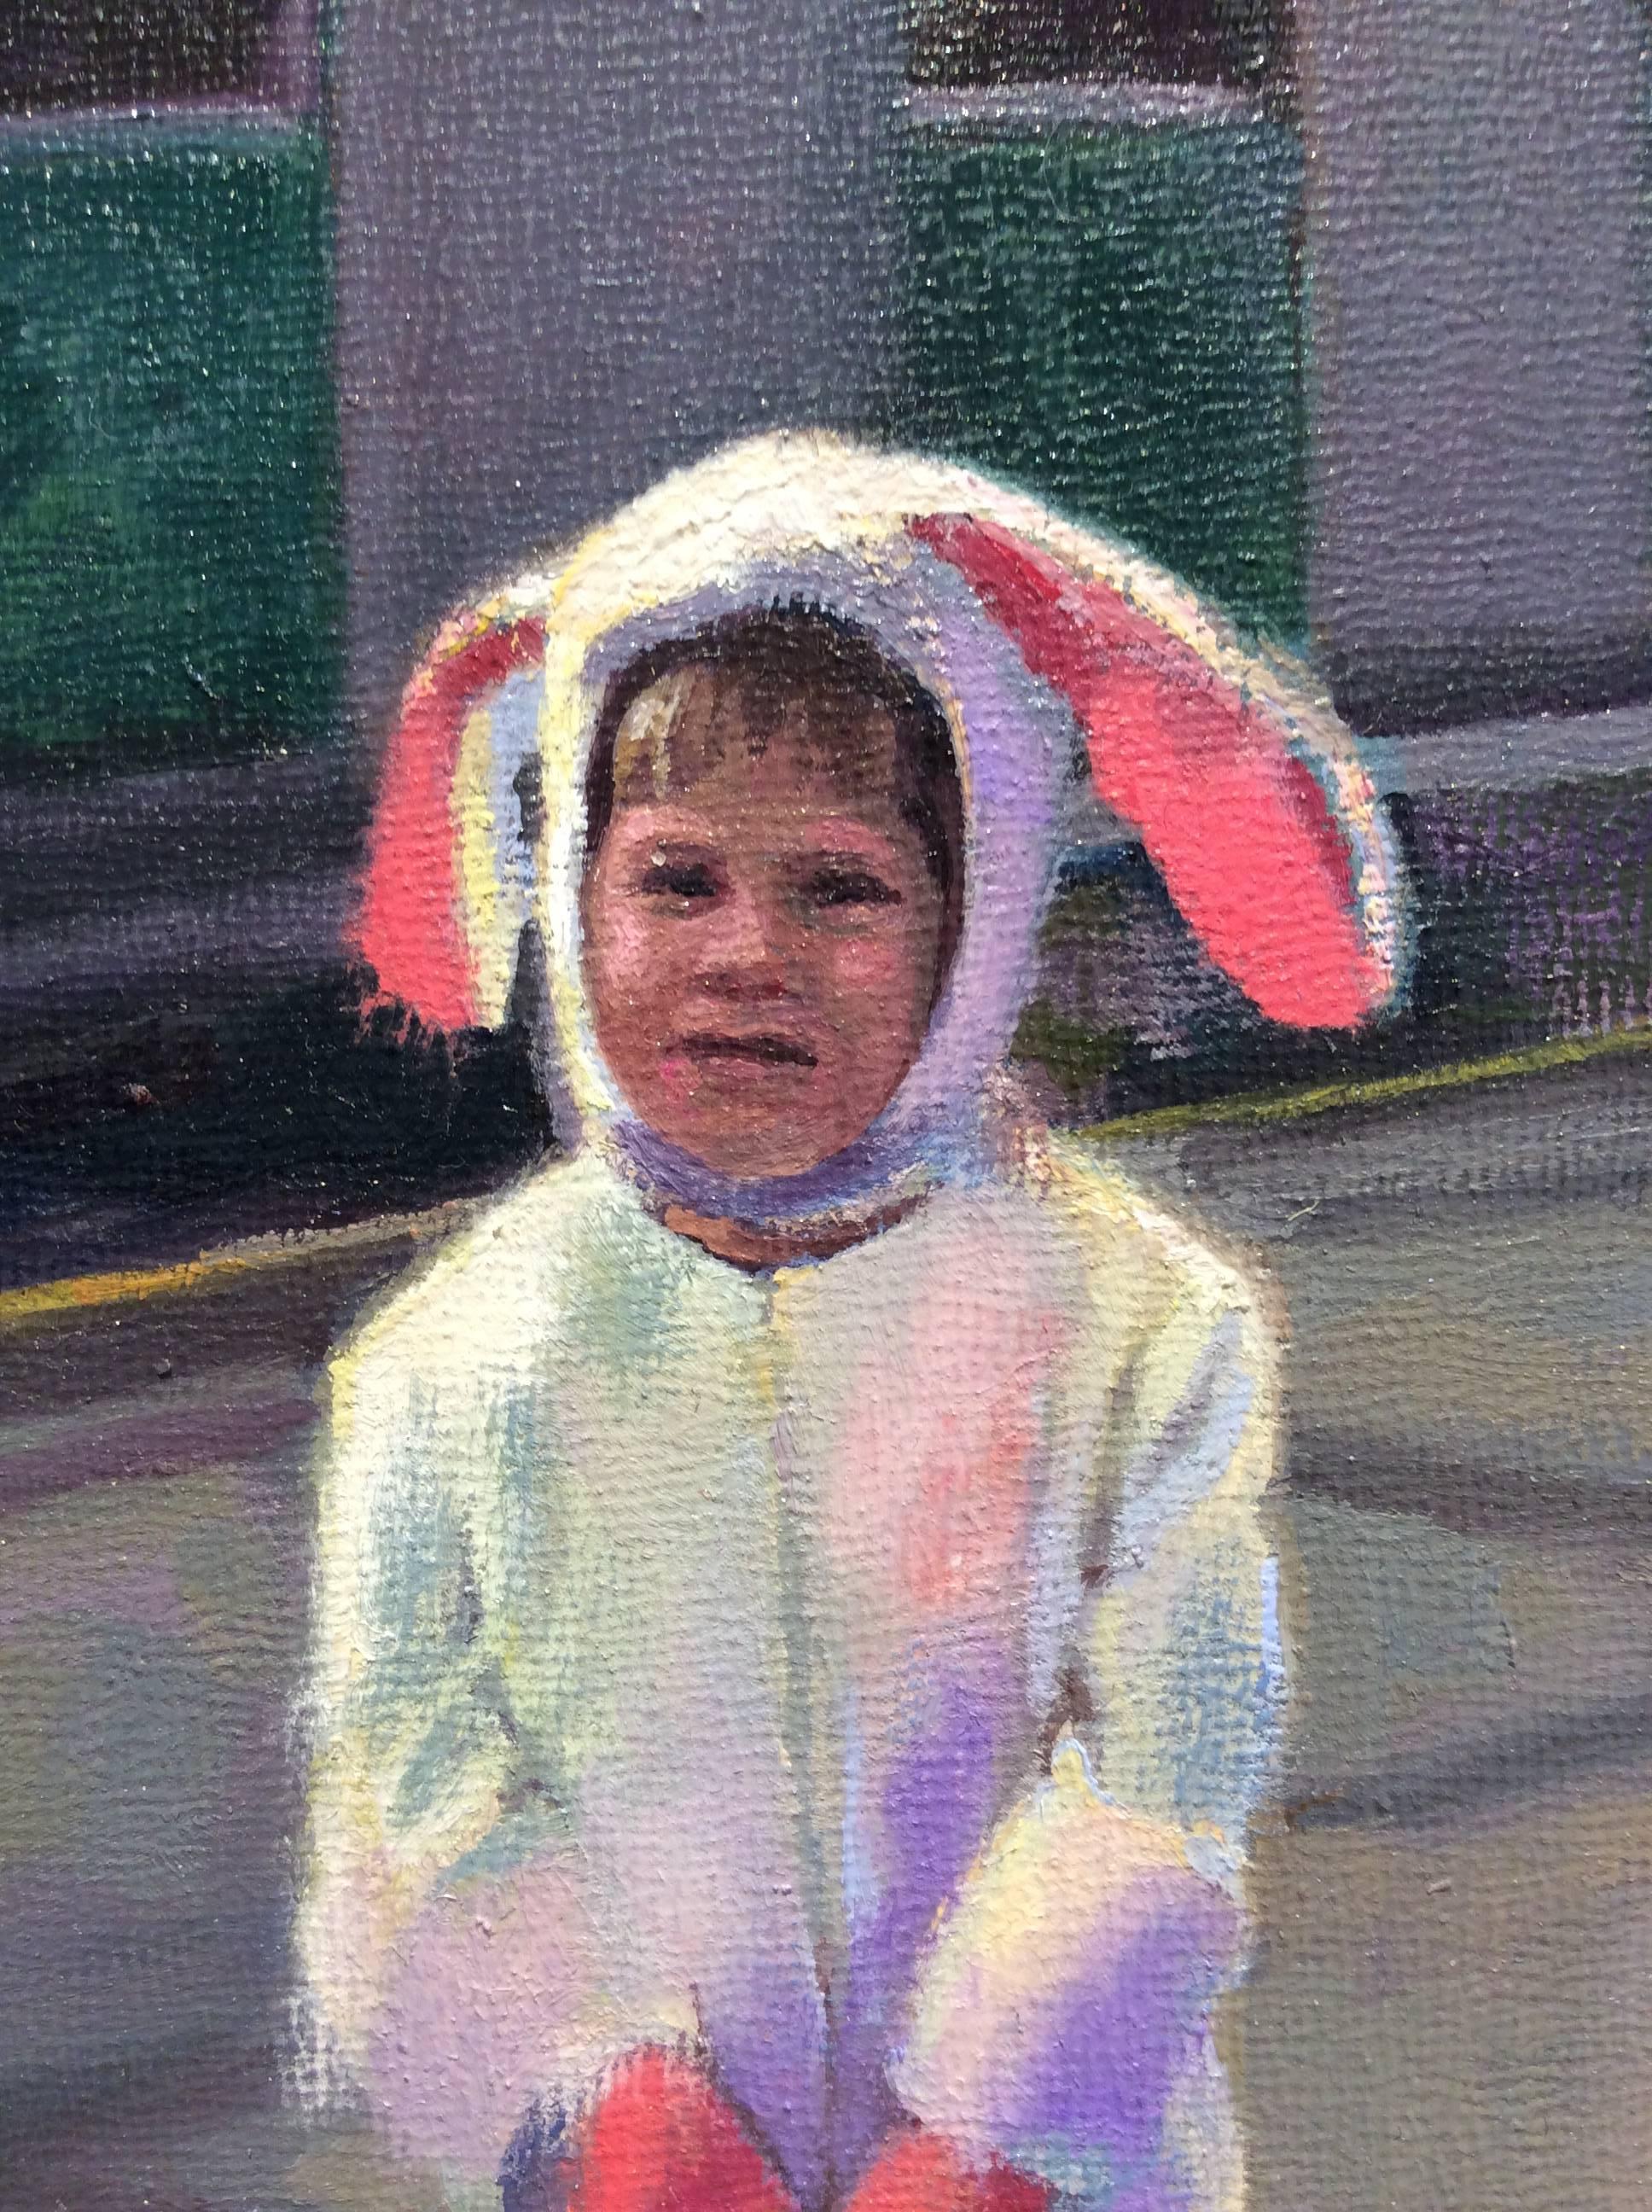 Bunny (Figurative Oil Painting of Vintage Photograph of Child in Bunny Costume) - Gray Figurative Painting by Carl Grauer